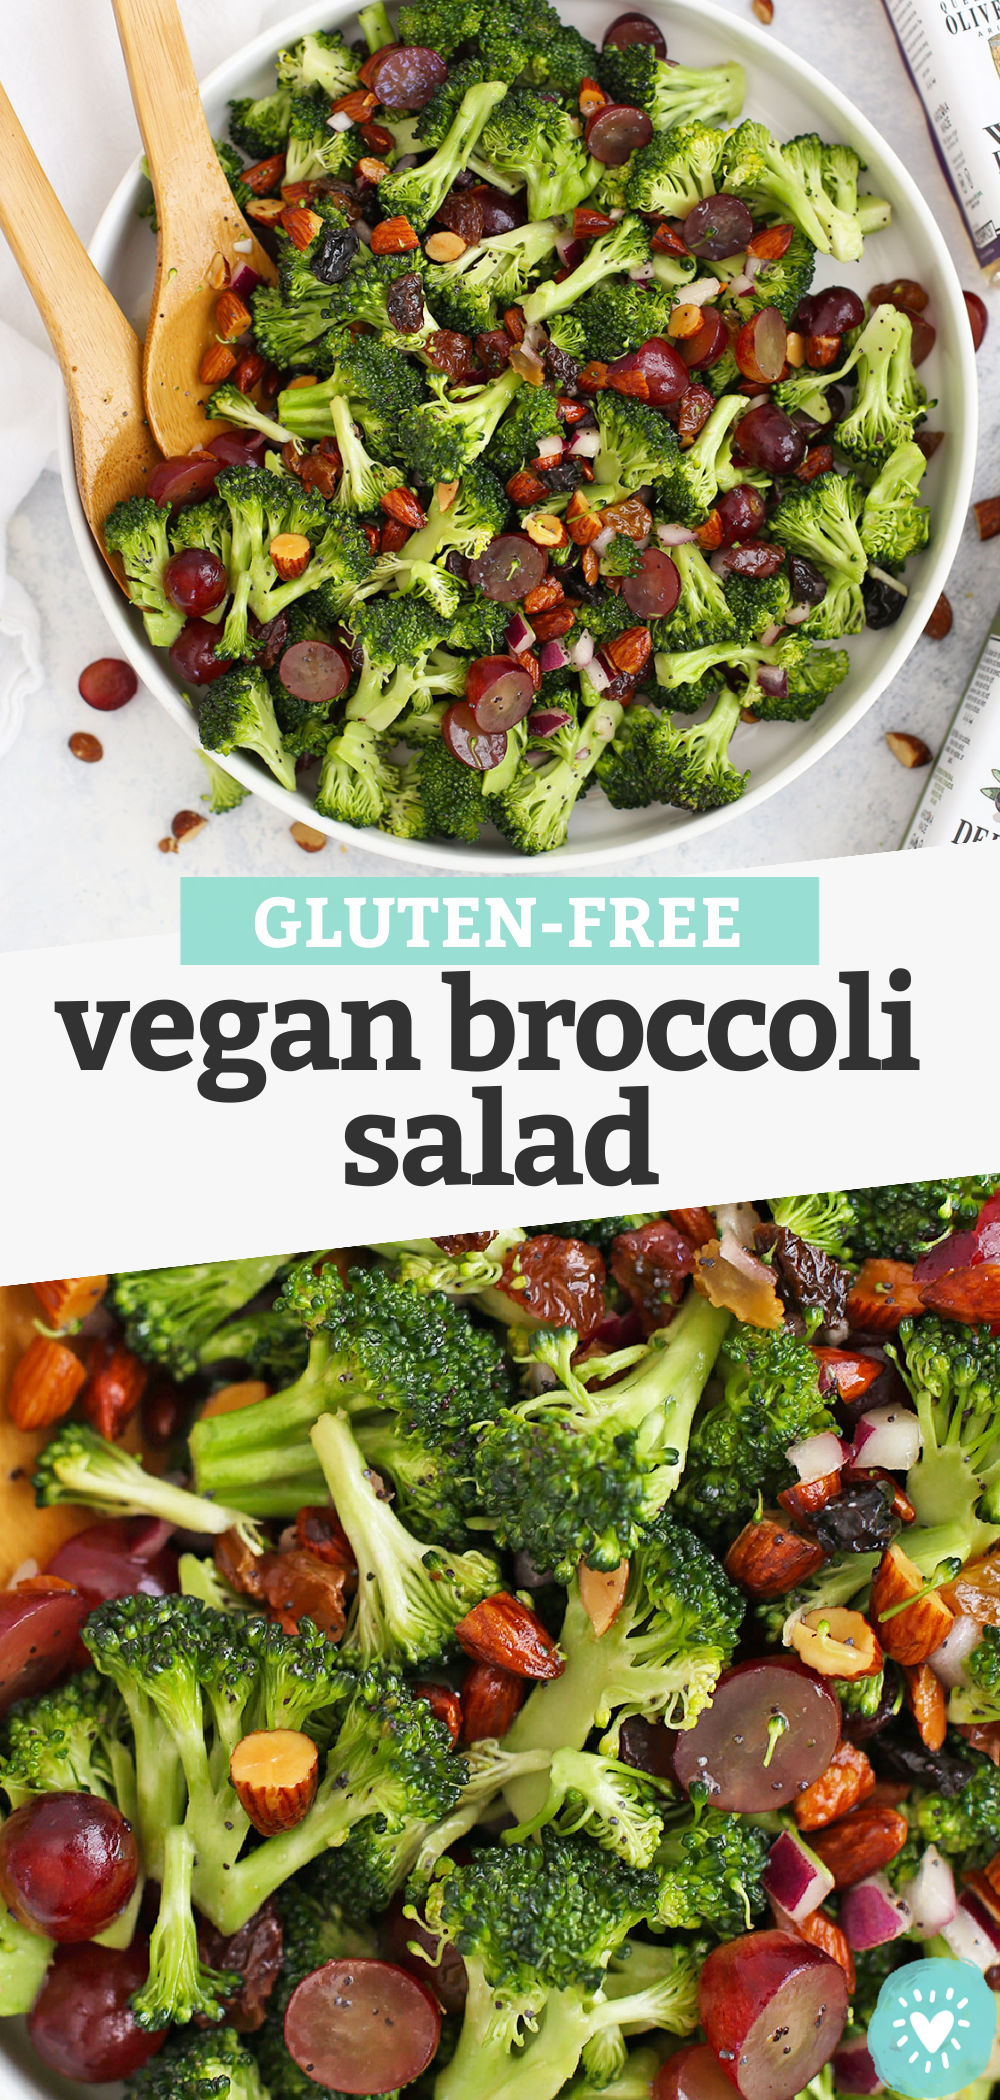 Collage of images of vegan broccoli salad with poppy seed dressing with text overlay that reads "Gluten-Free Vegan Broccoli Salad"